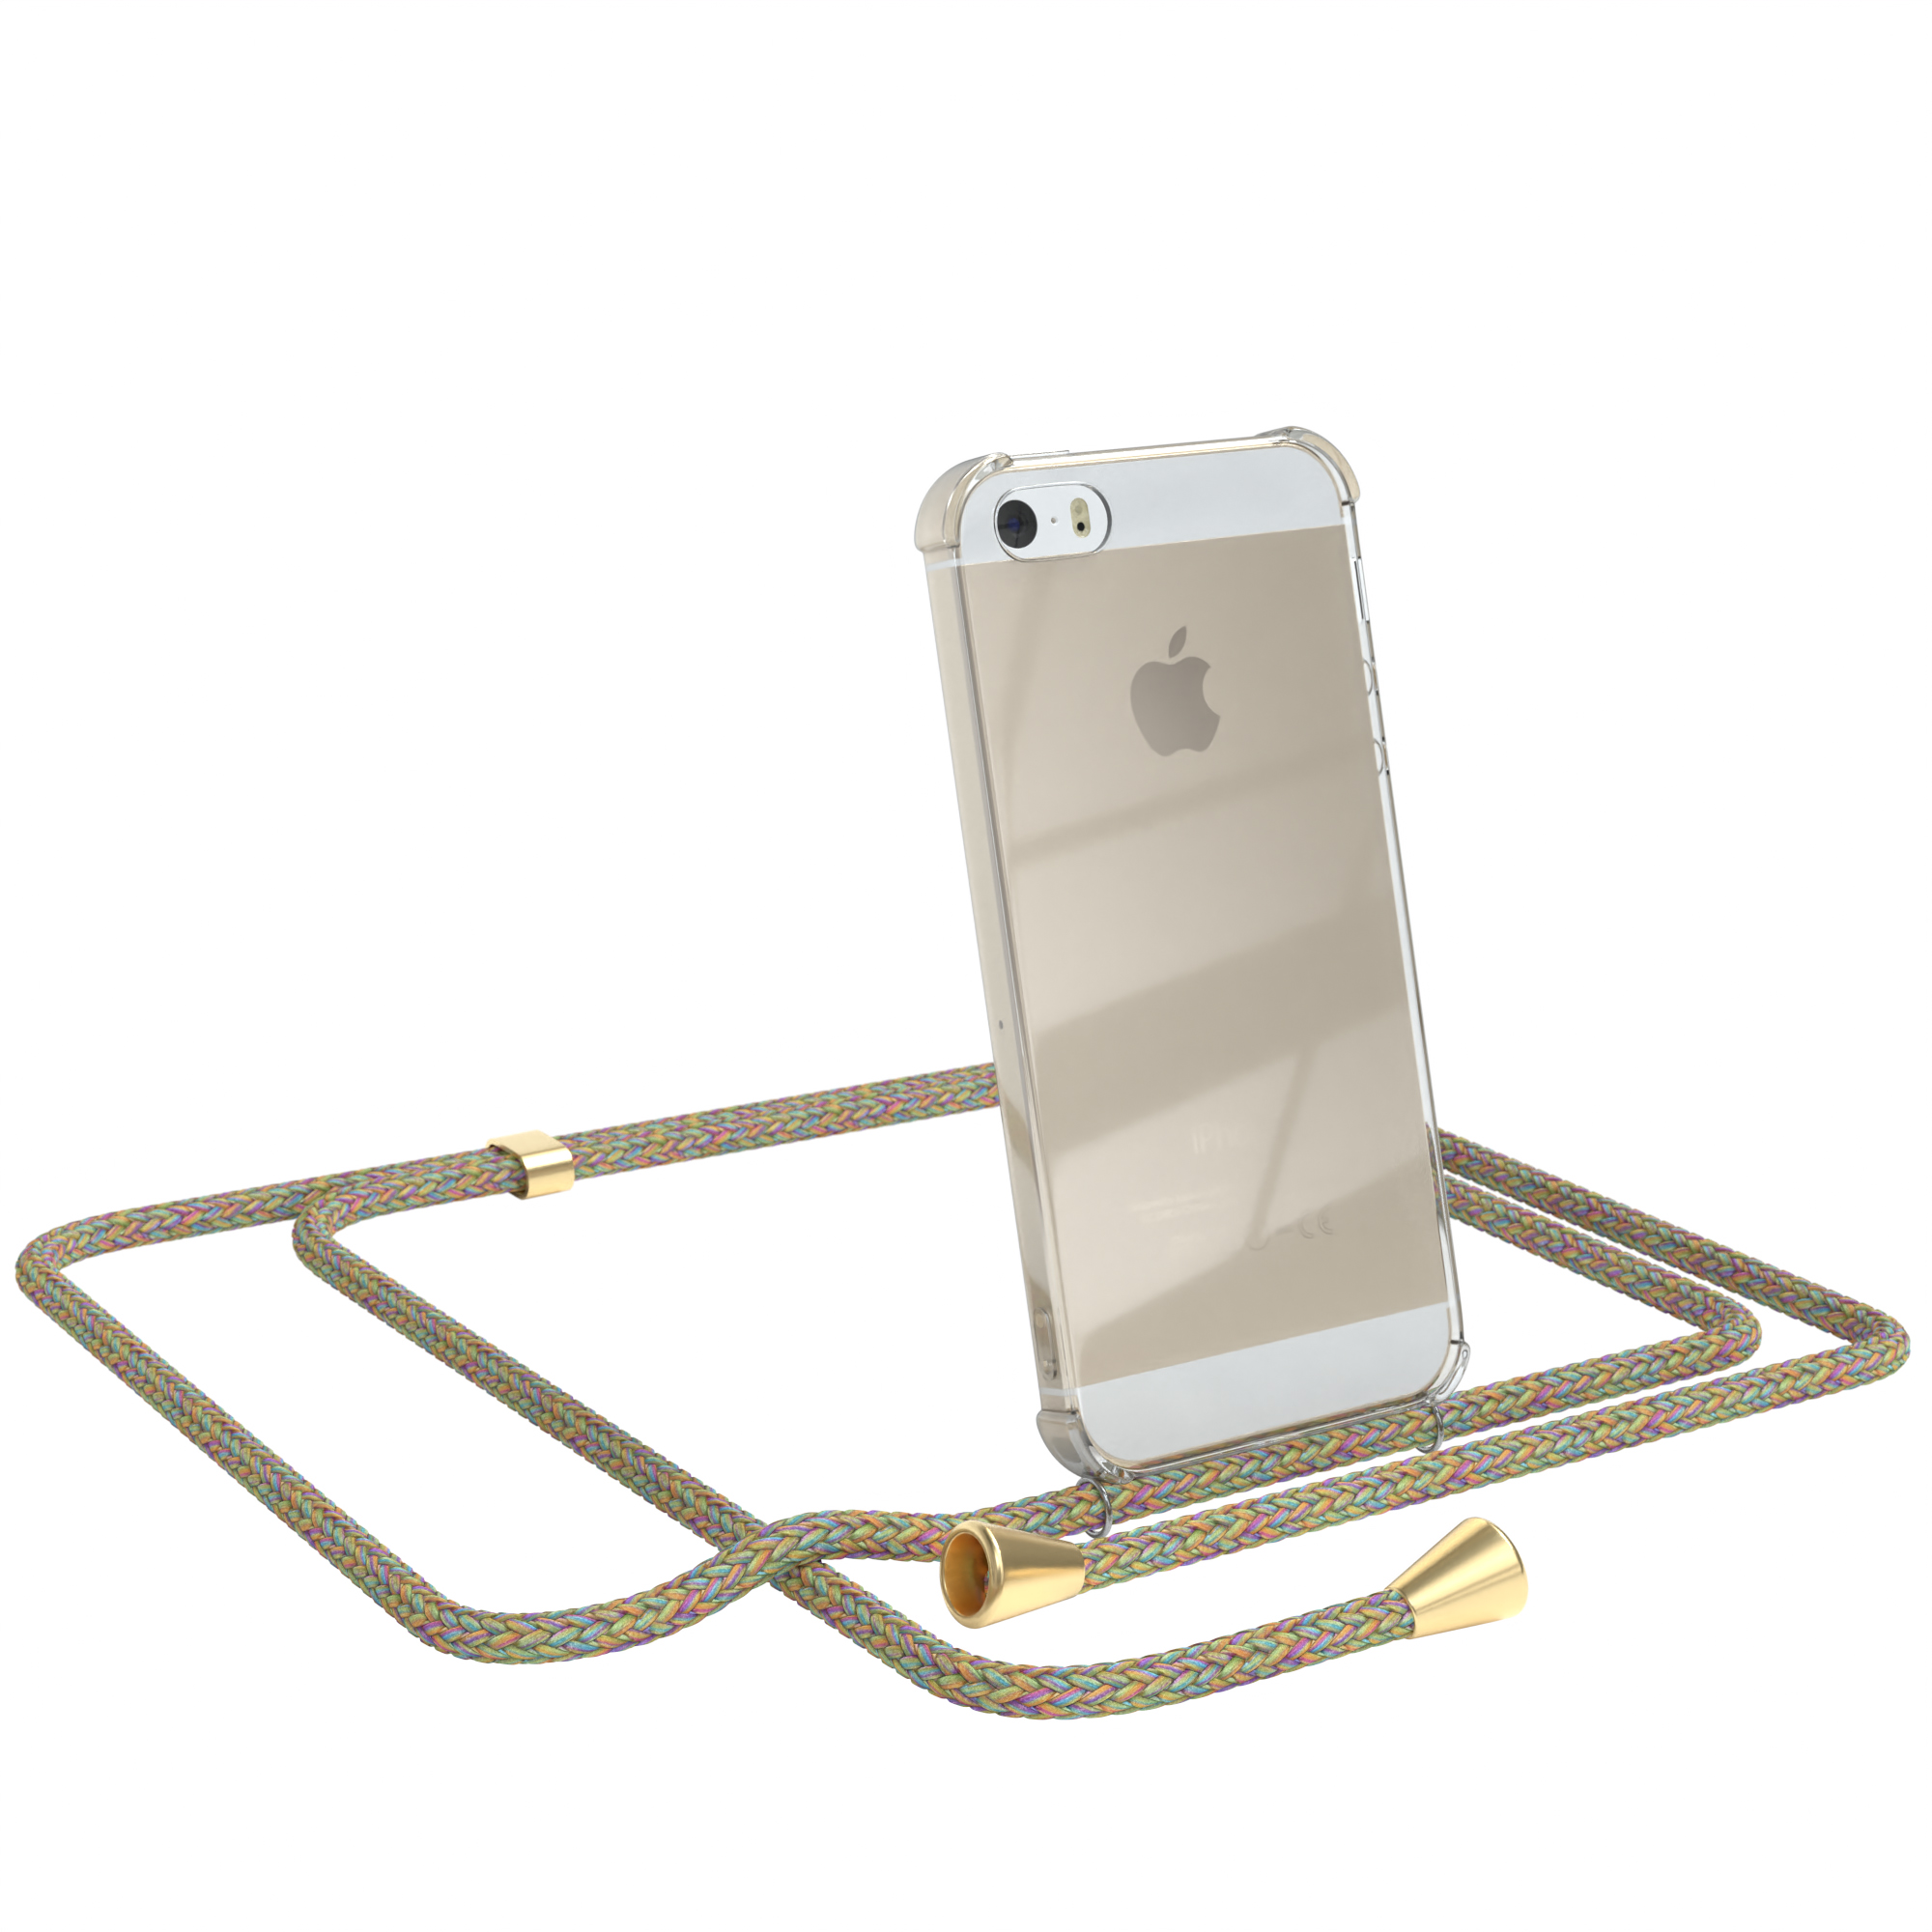 / Cover Gold CASE Apple, iPhone 5 Bunt / 2016, SE 5S, Clear EAZY Umhängeband, iPhone Clips mit Umhängetasche,